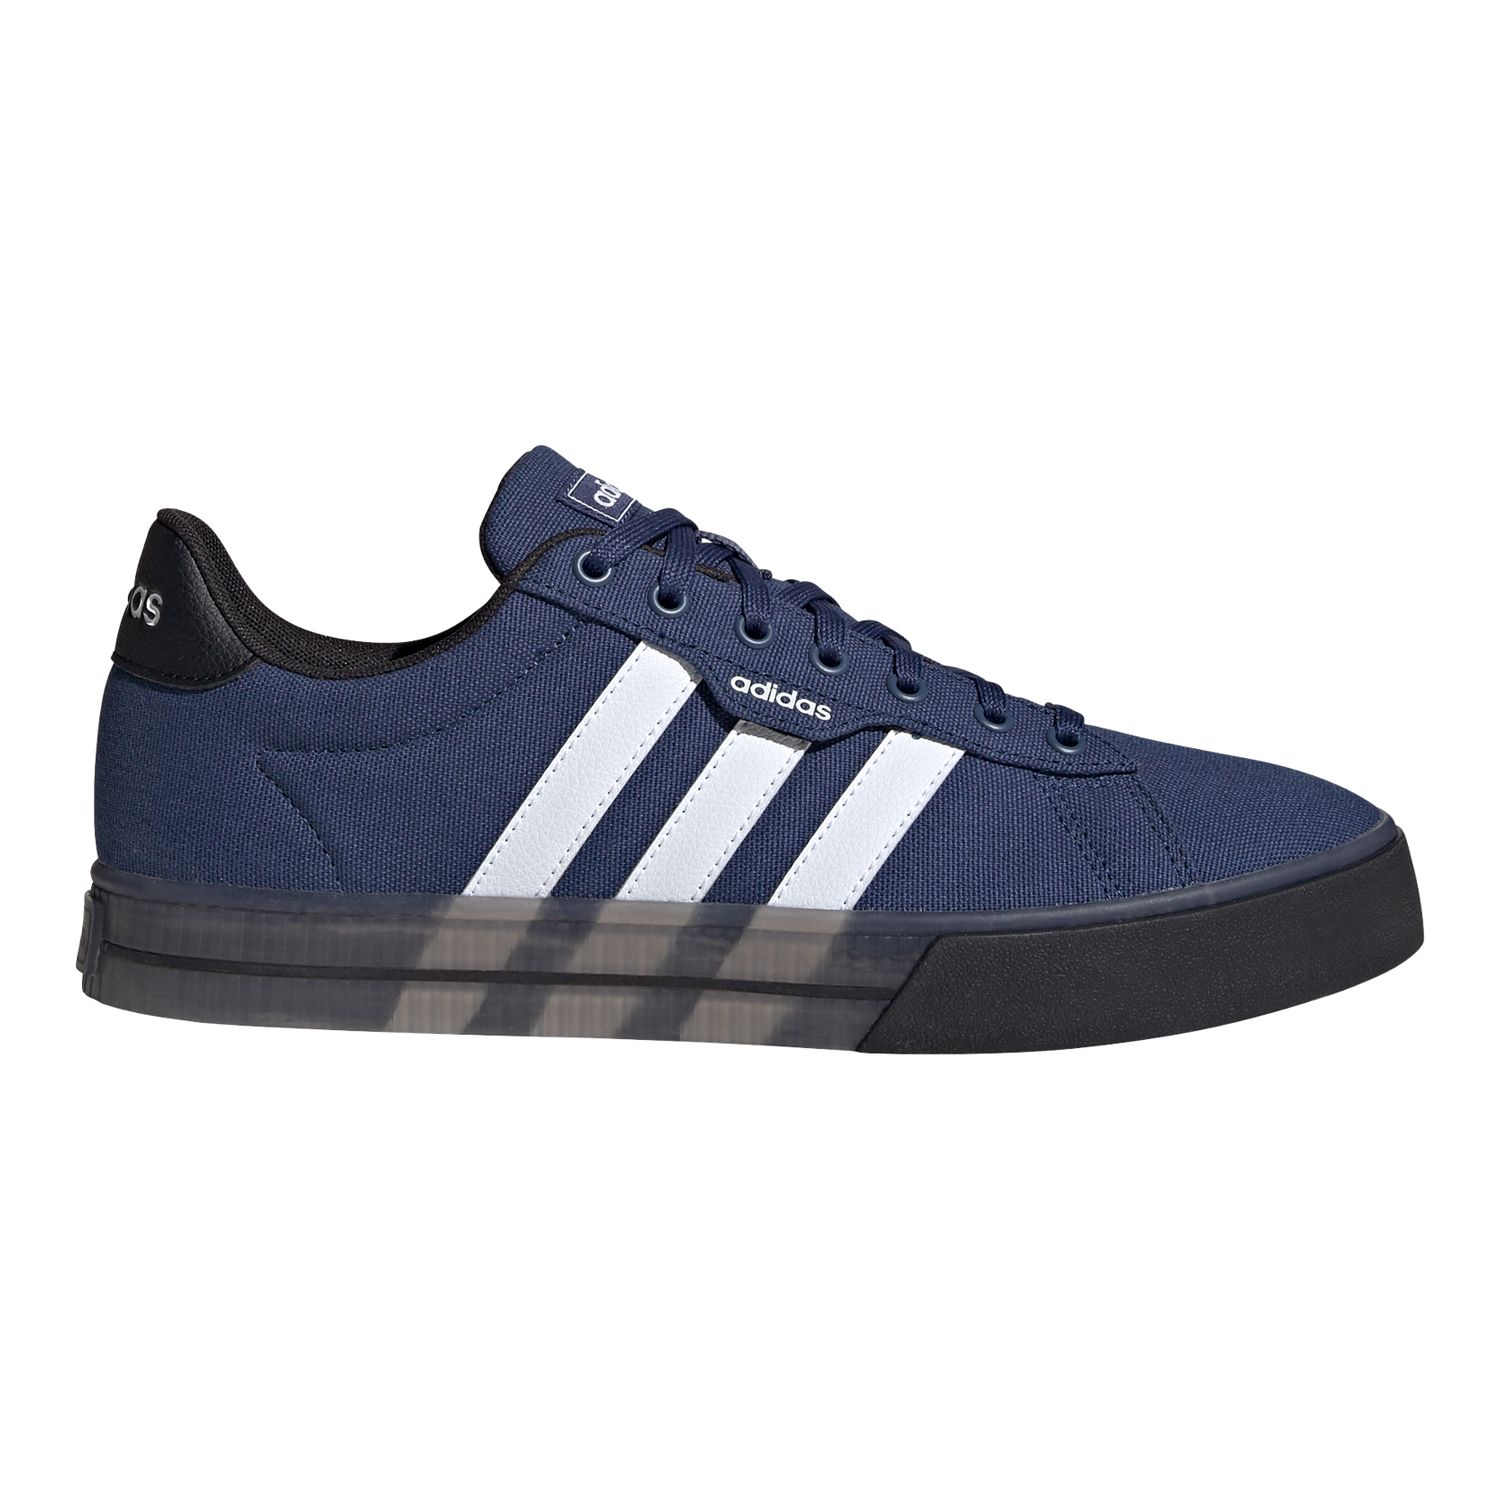 womens navy blue adidas shoes